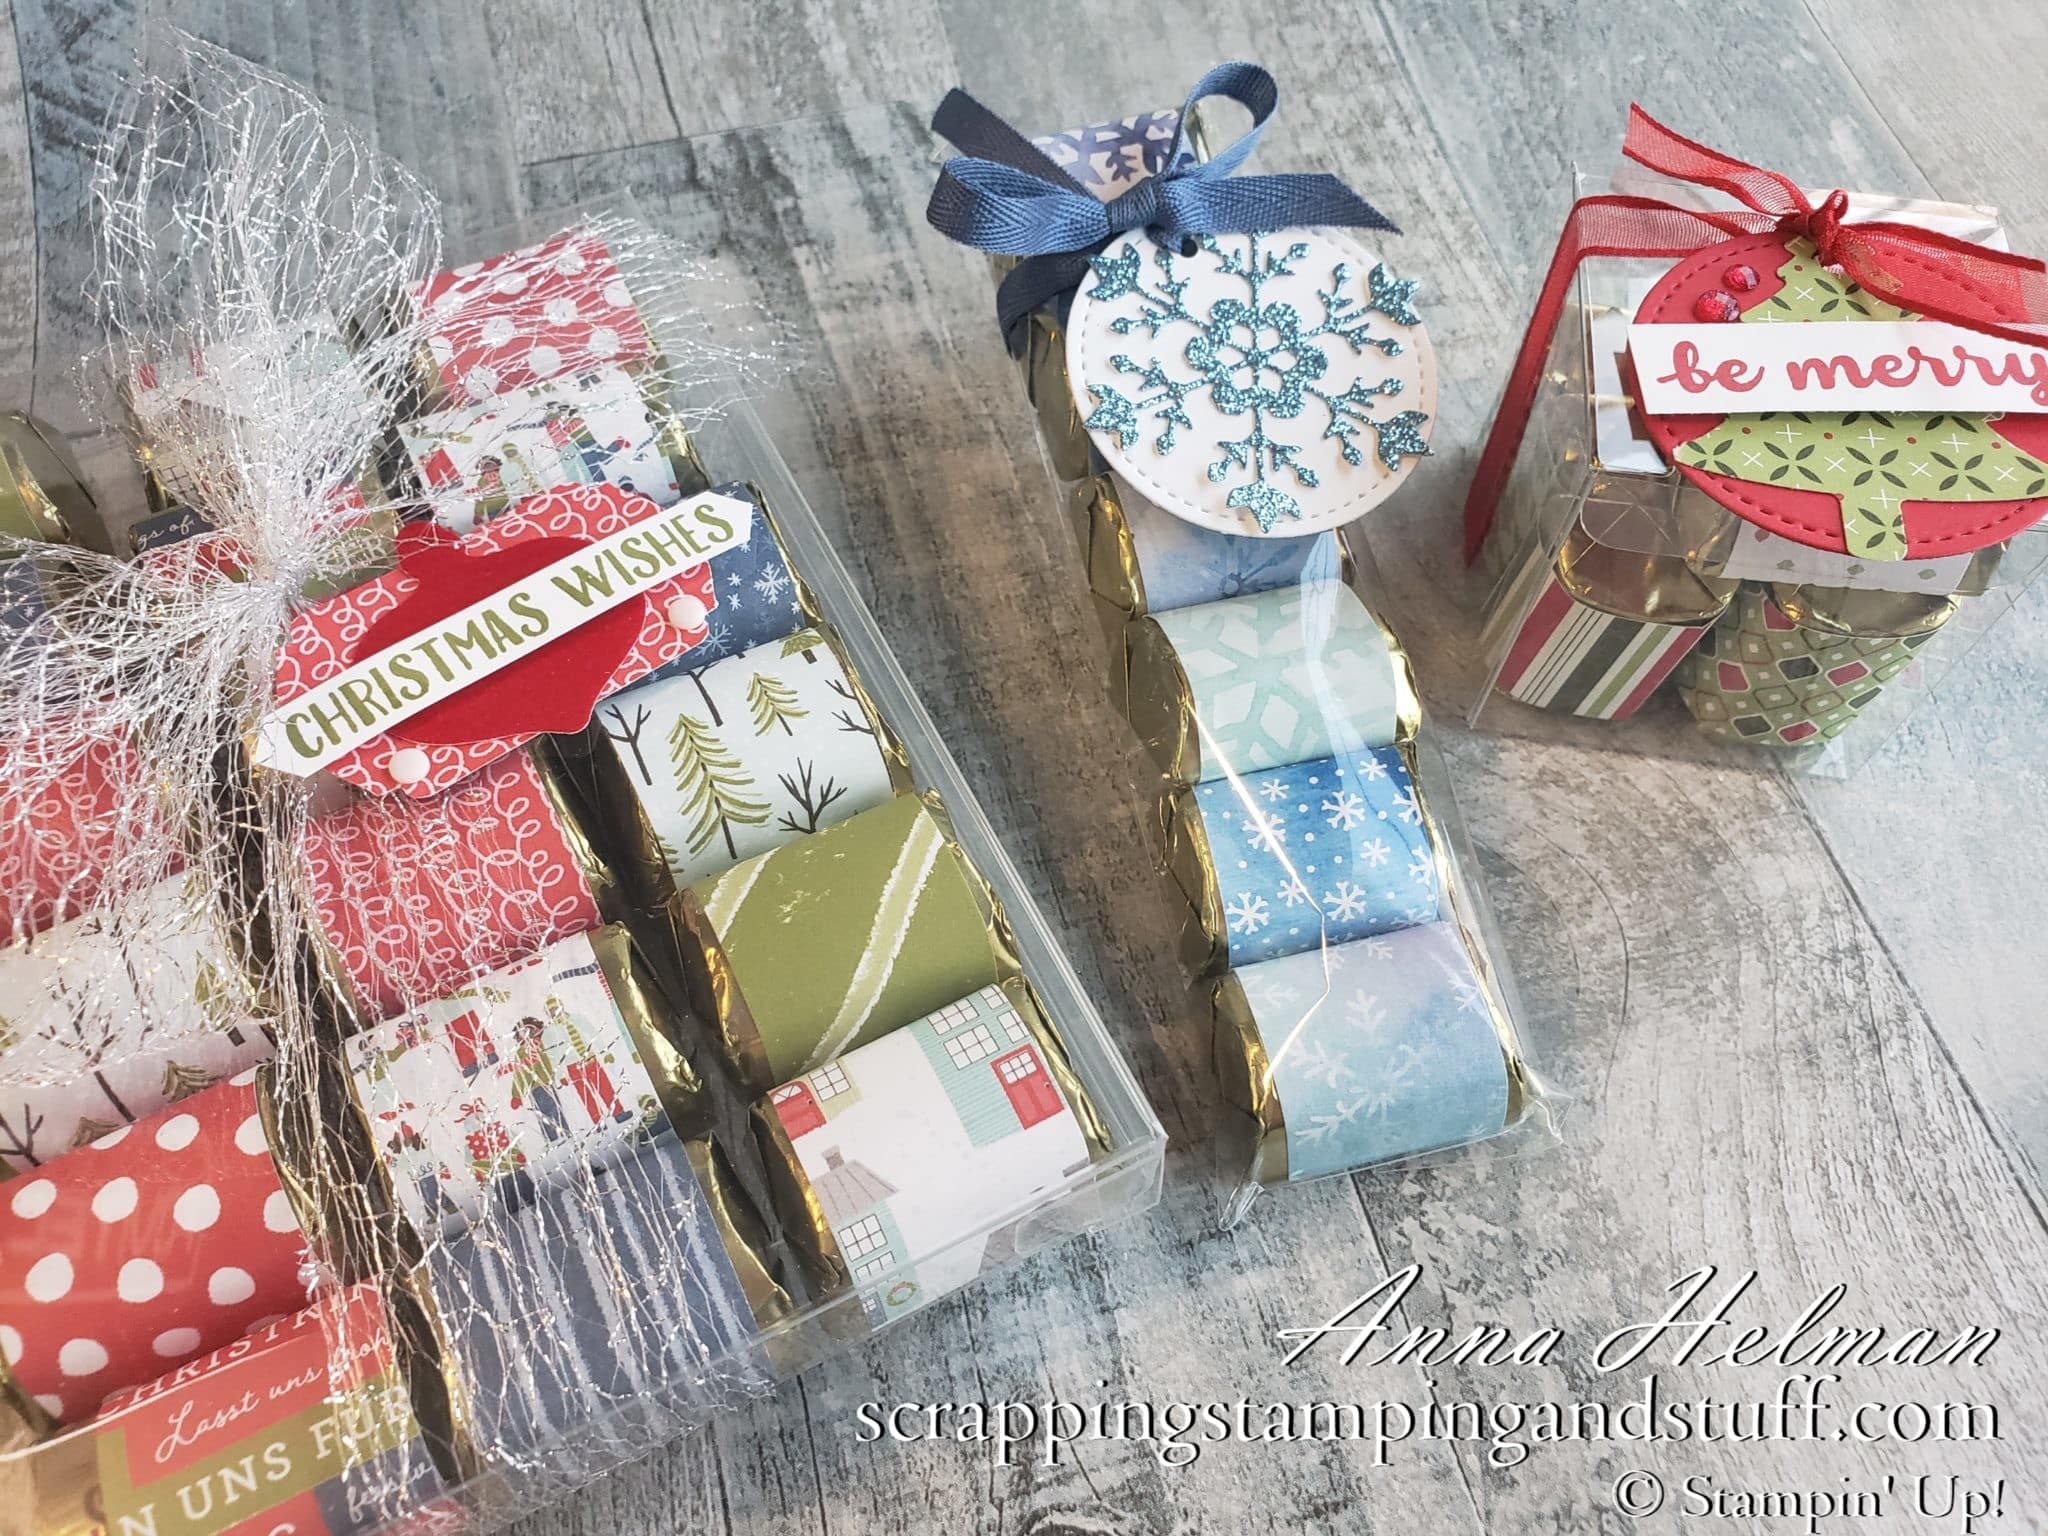 Decorated Hershey’s Nuggets – Day 1 of 12 Days of DIY Gift Ideas